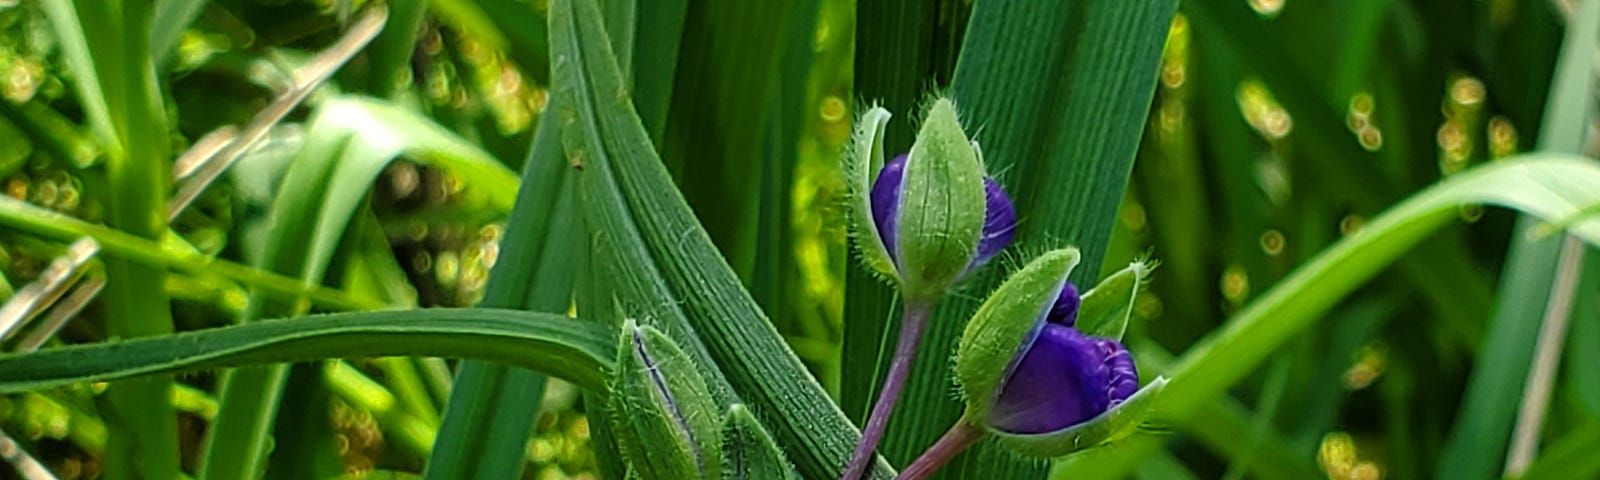 Wildflower plant (spiderwort) close-up of small purple buds and green leaves.